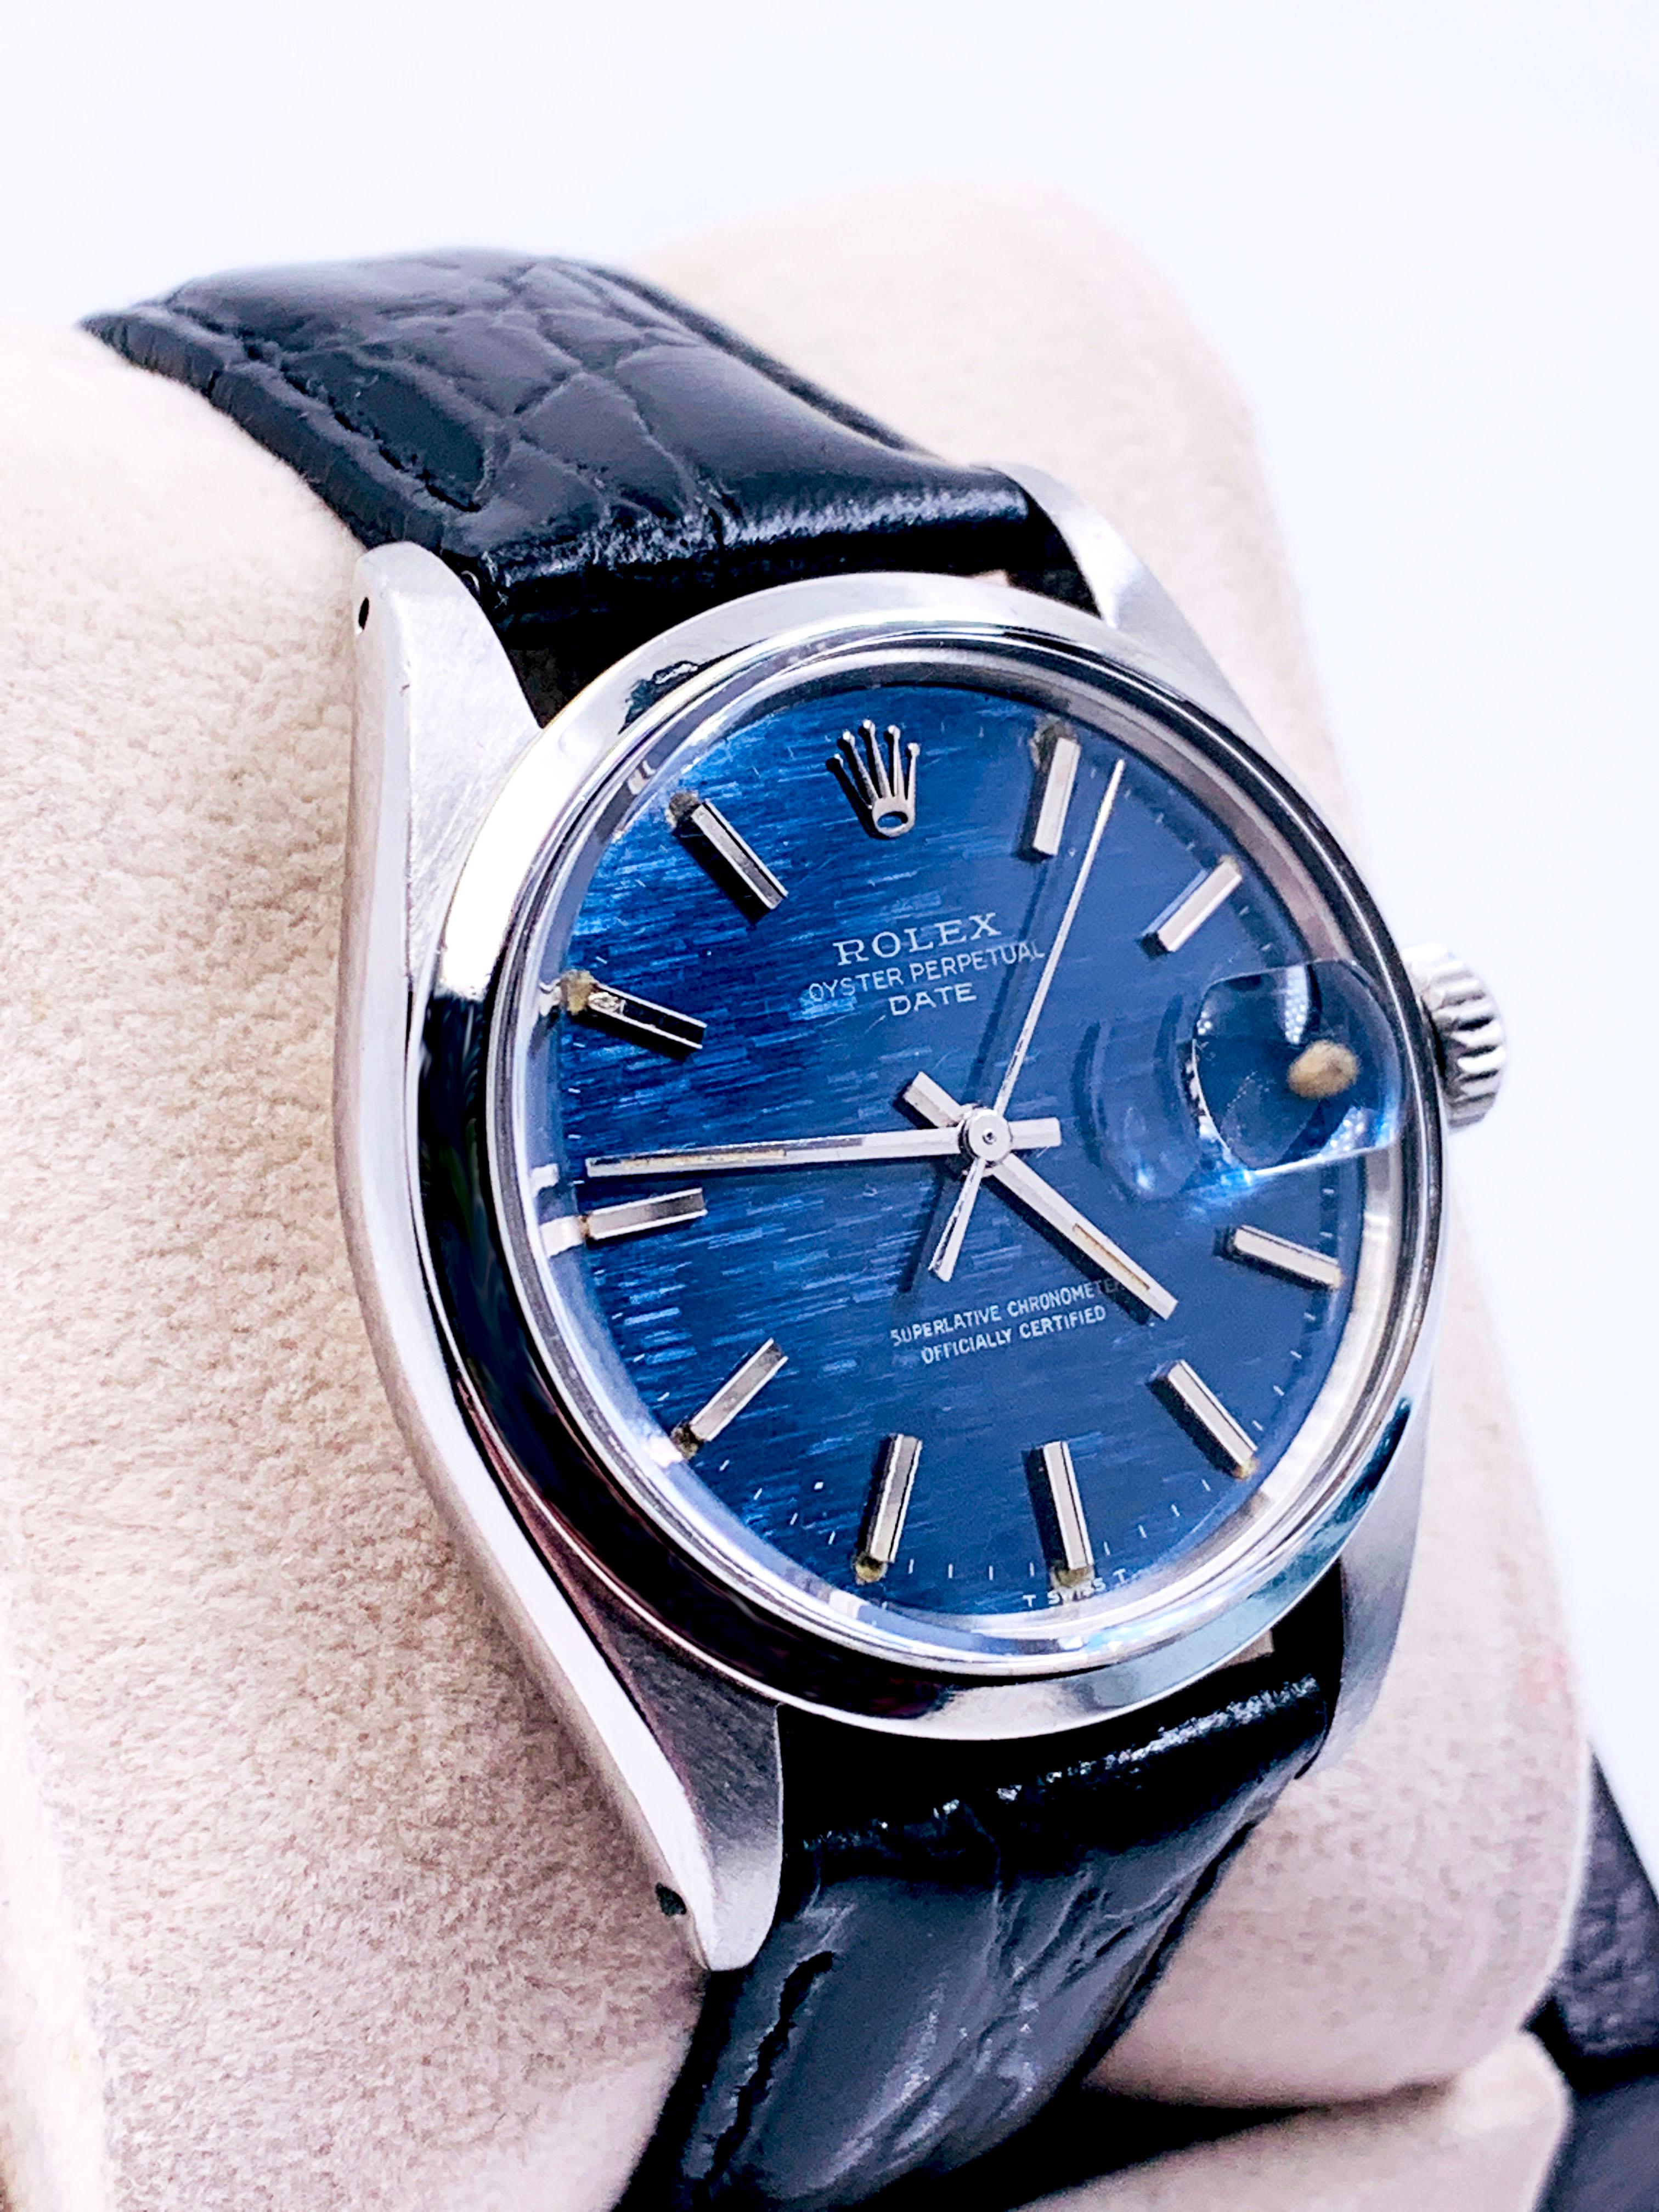 Style Number: 1500

 

Serial: 2531***

 

Model: Date

 

Case Material: Stainless Steel 

 

Band: Custom Black Leather Band 

 

Bezel: Stainless Steel 

 

Dial: Blue Mosaic (Shantung) 

 

Face: Acrylic 

 

Case Size: 34mm 

 

Includes: